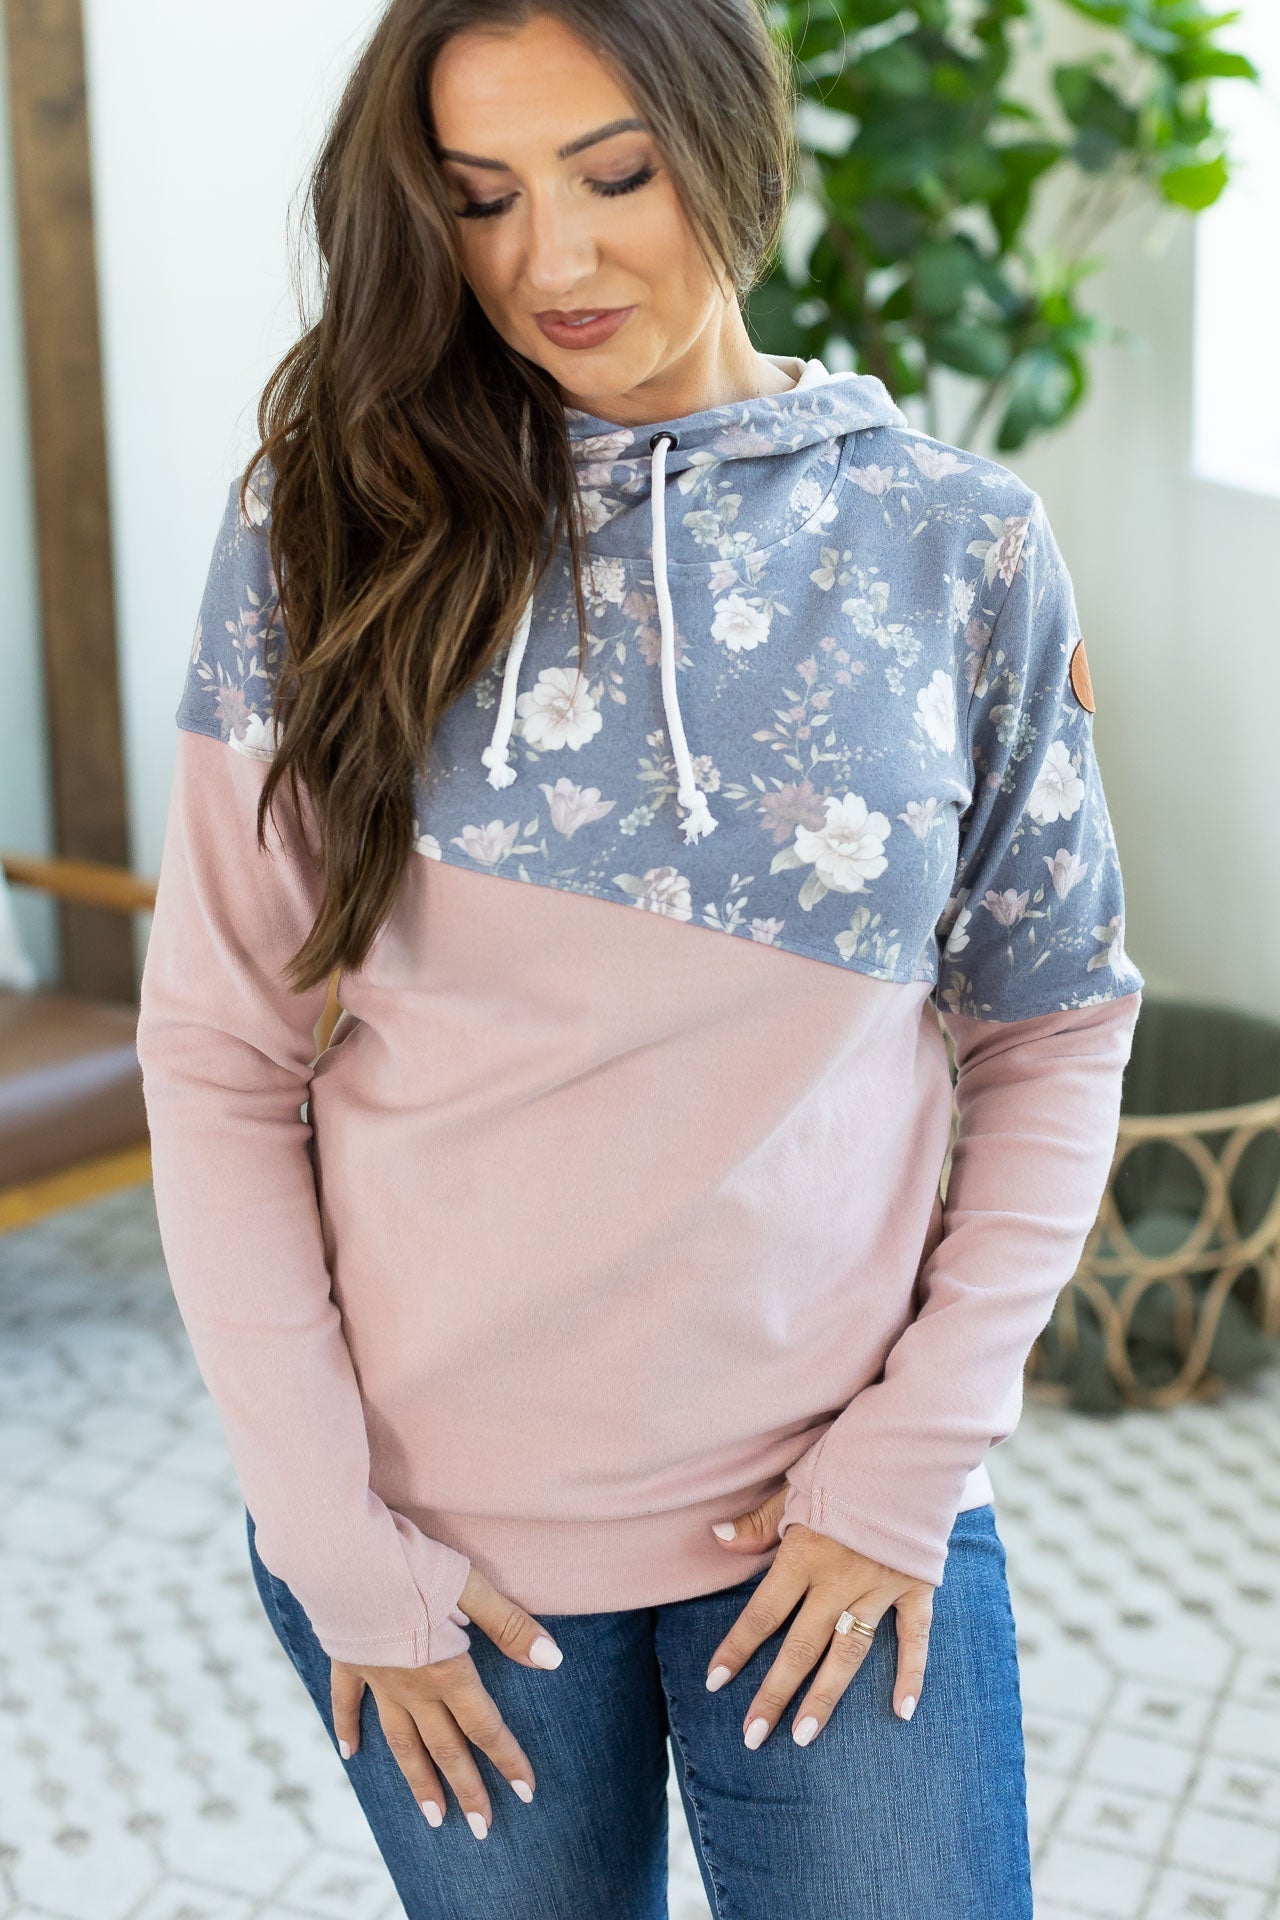 Hoodie - Blush and Floral